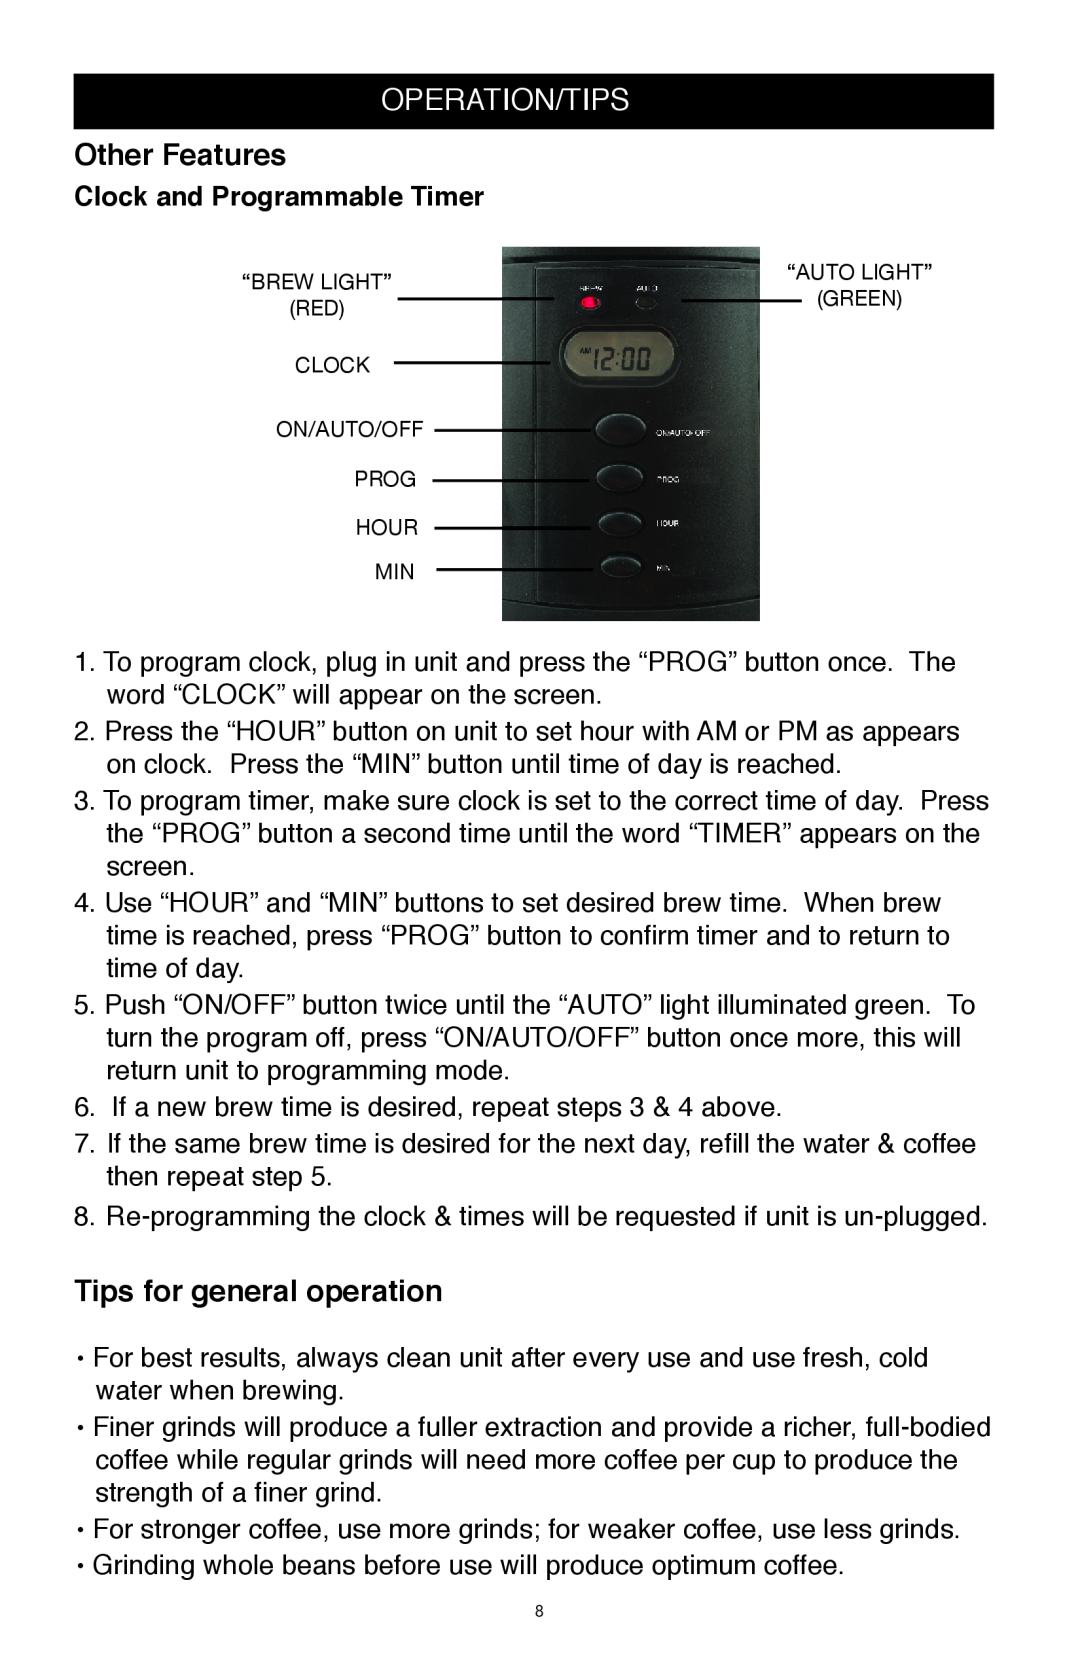 West Bend Back to Basics CC500 Operation/Tips, Other Features, Tips for general operation, Clock and Programmable Timer 